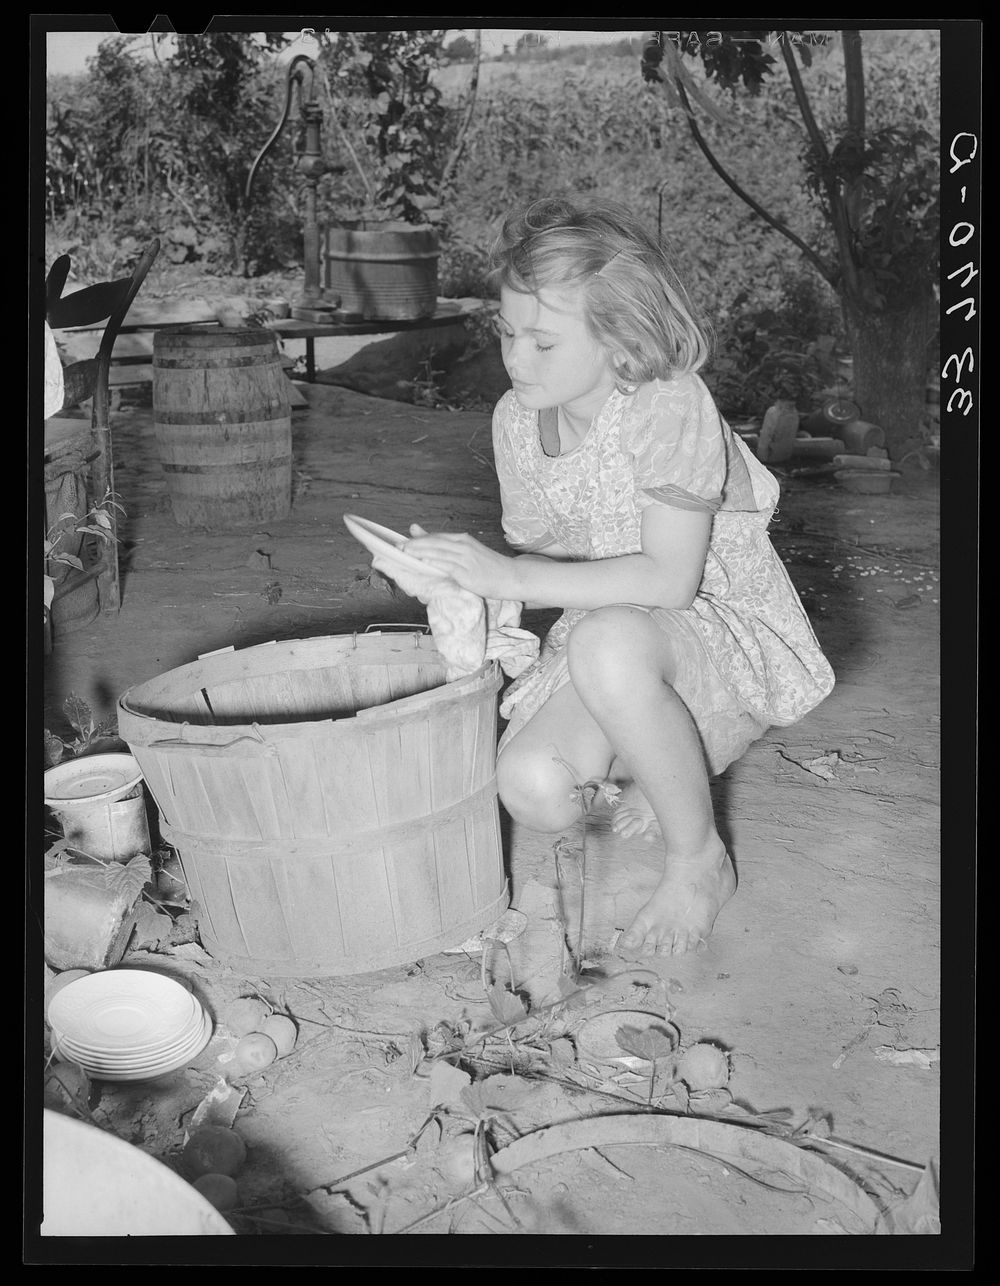 Daughter of migrant family wiping and packing dishes preparatory to leaving for California from Muskogee, Oklahoma by…